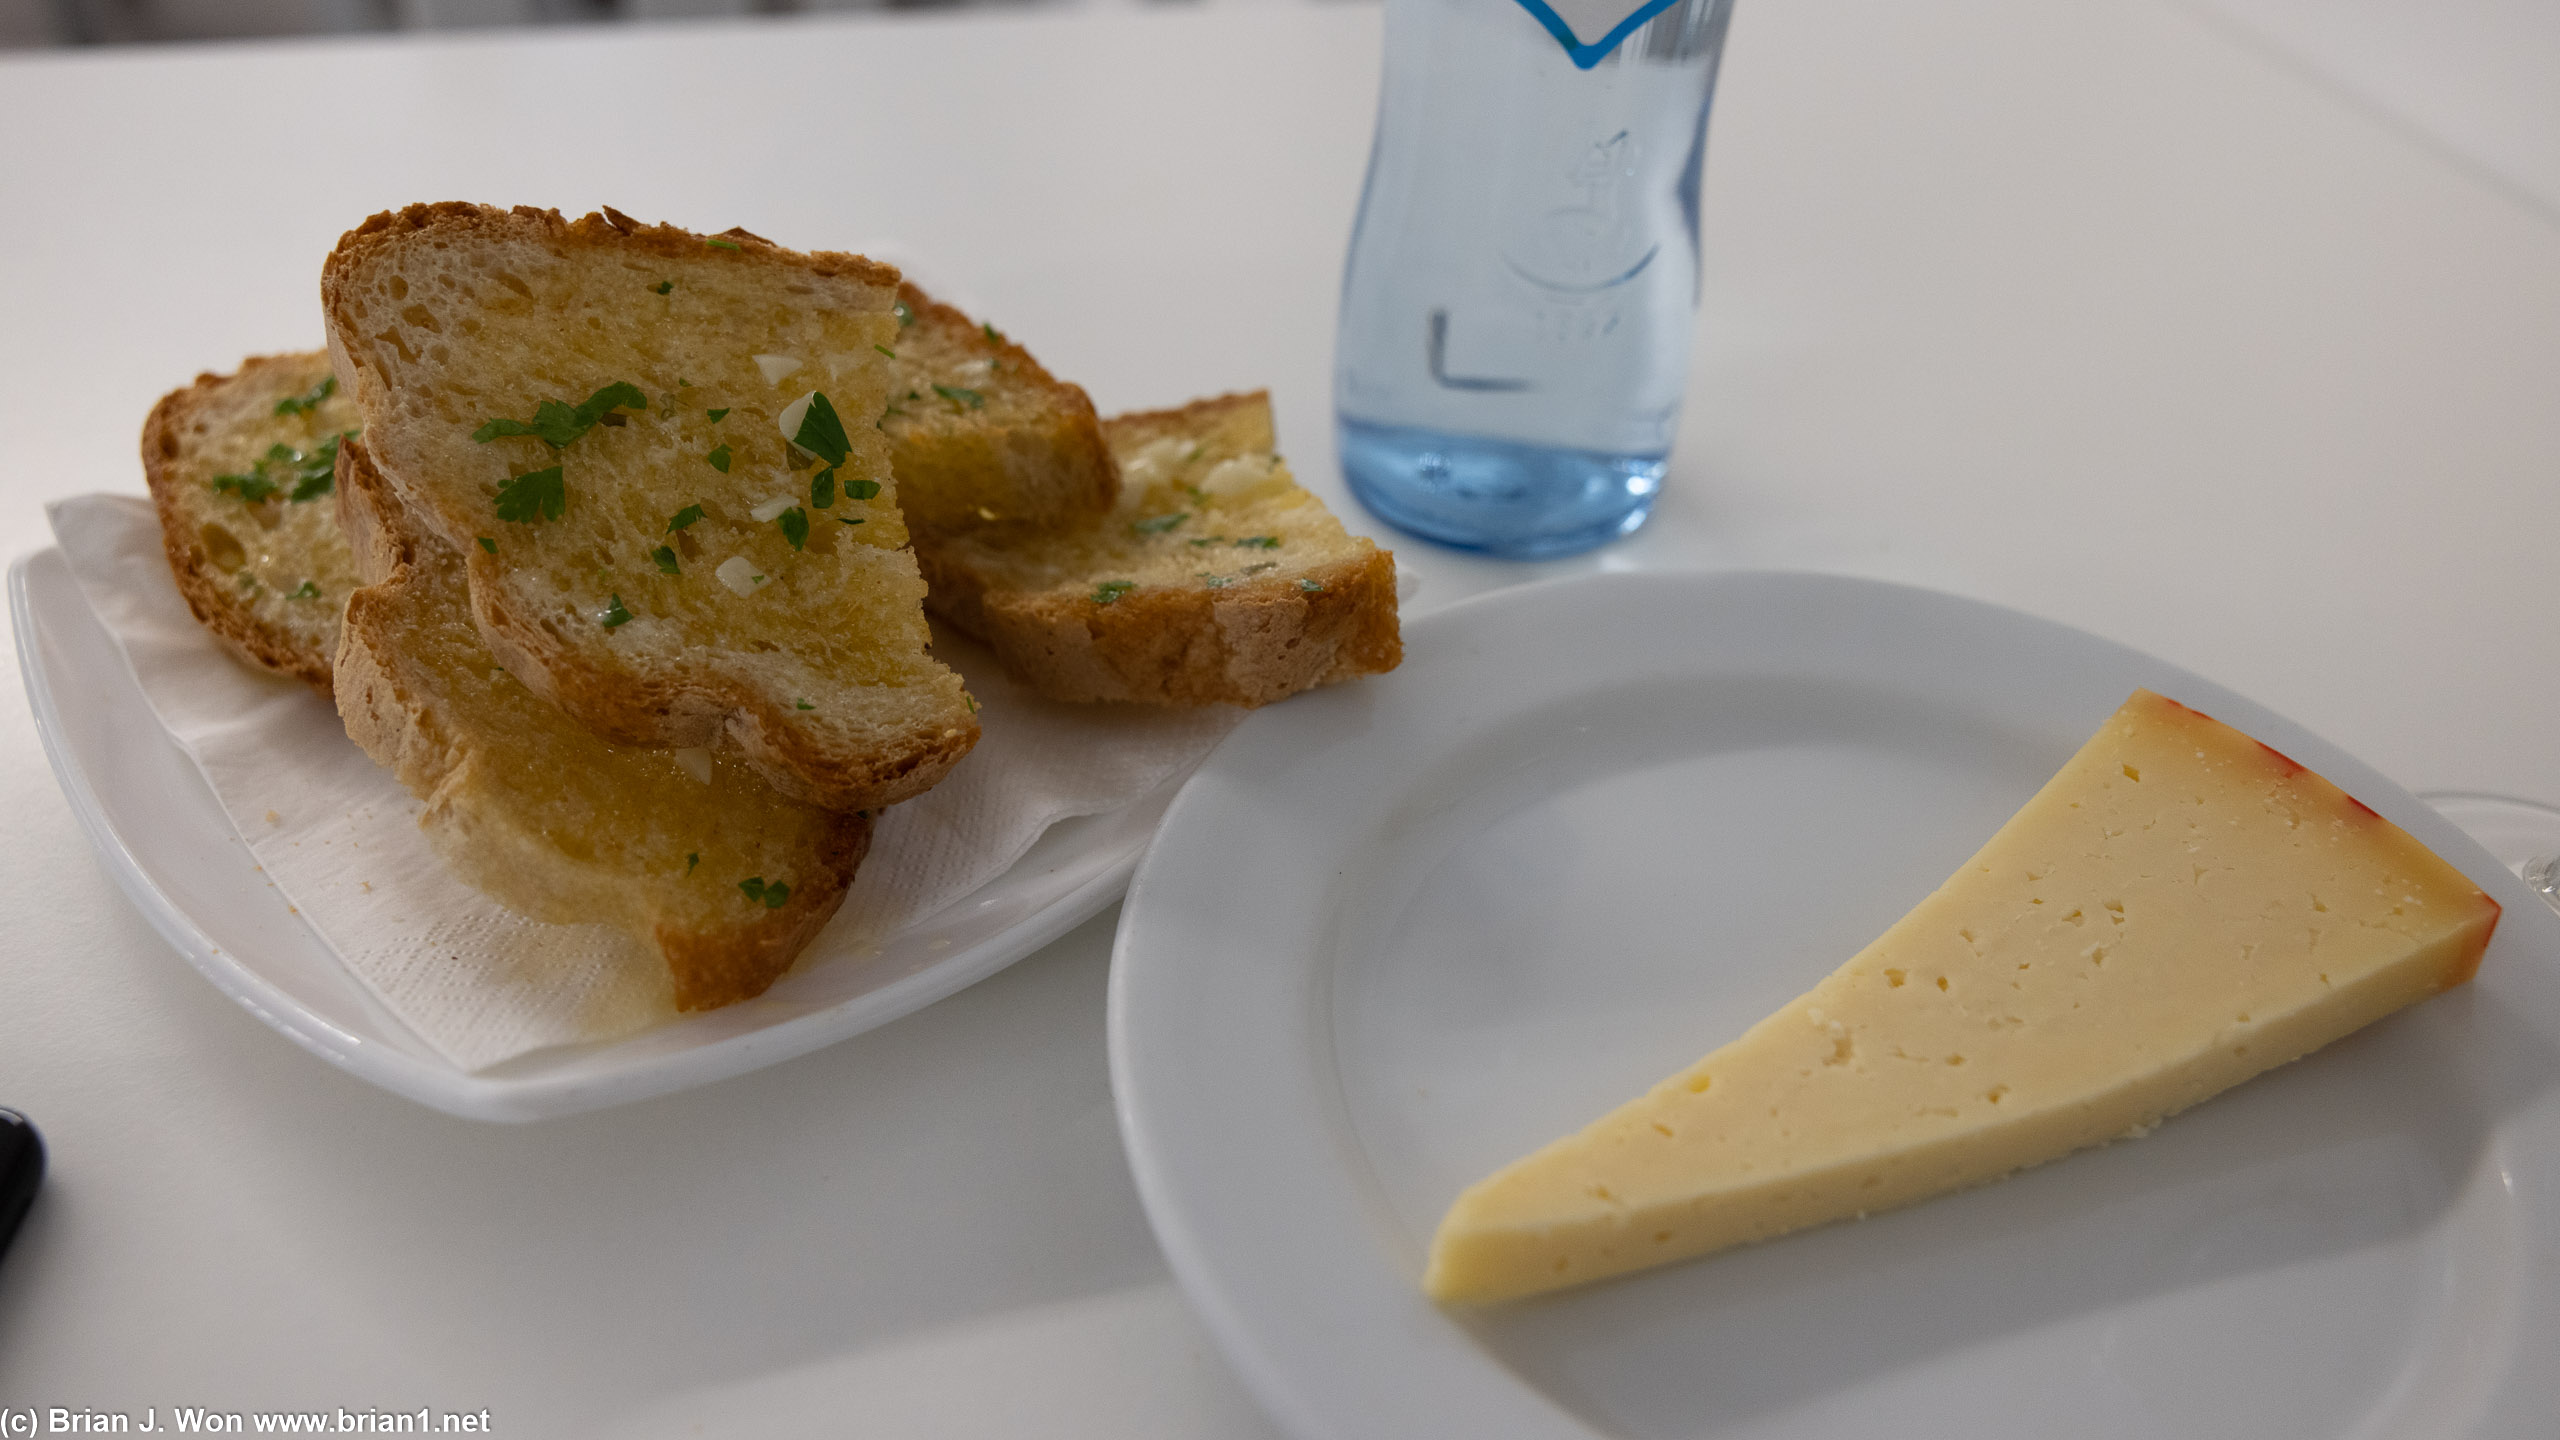 Local cheese is pretty consistent everywhere, the garlic bread was very buttery.